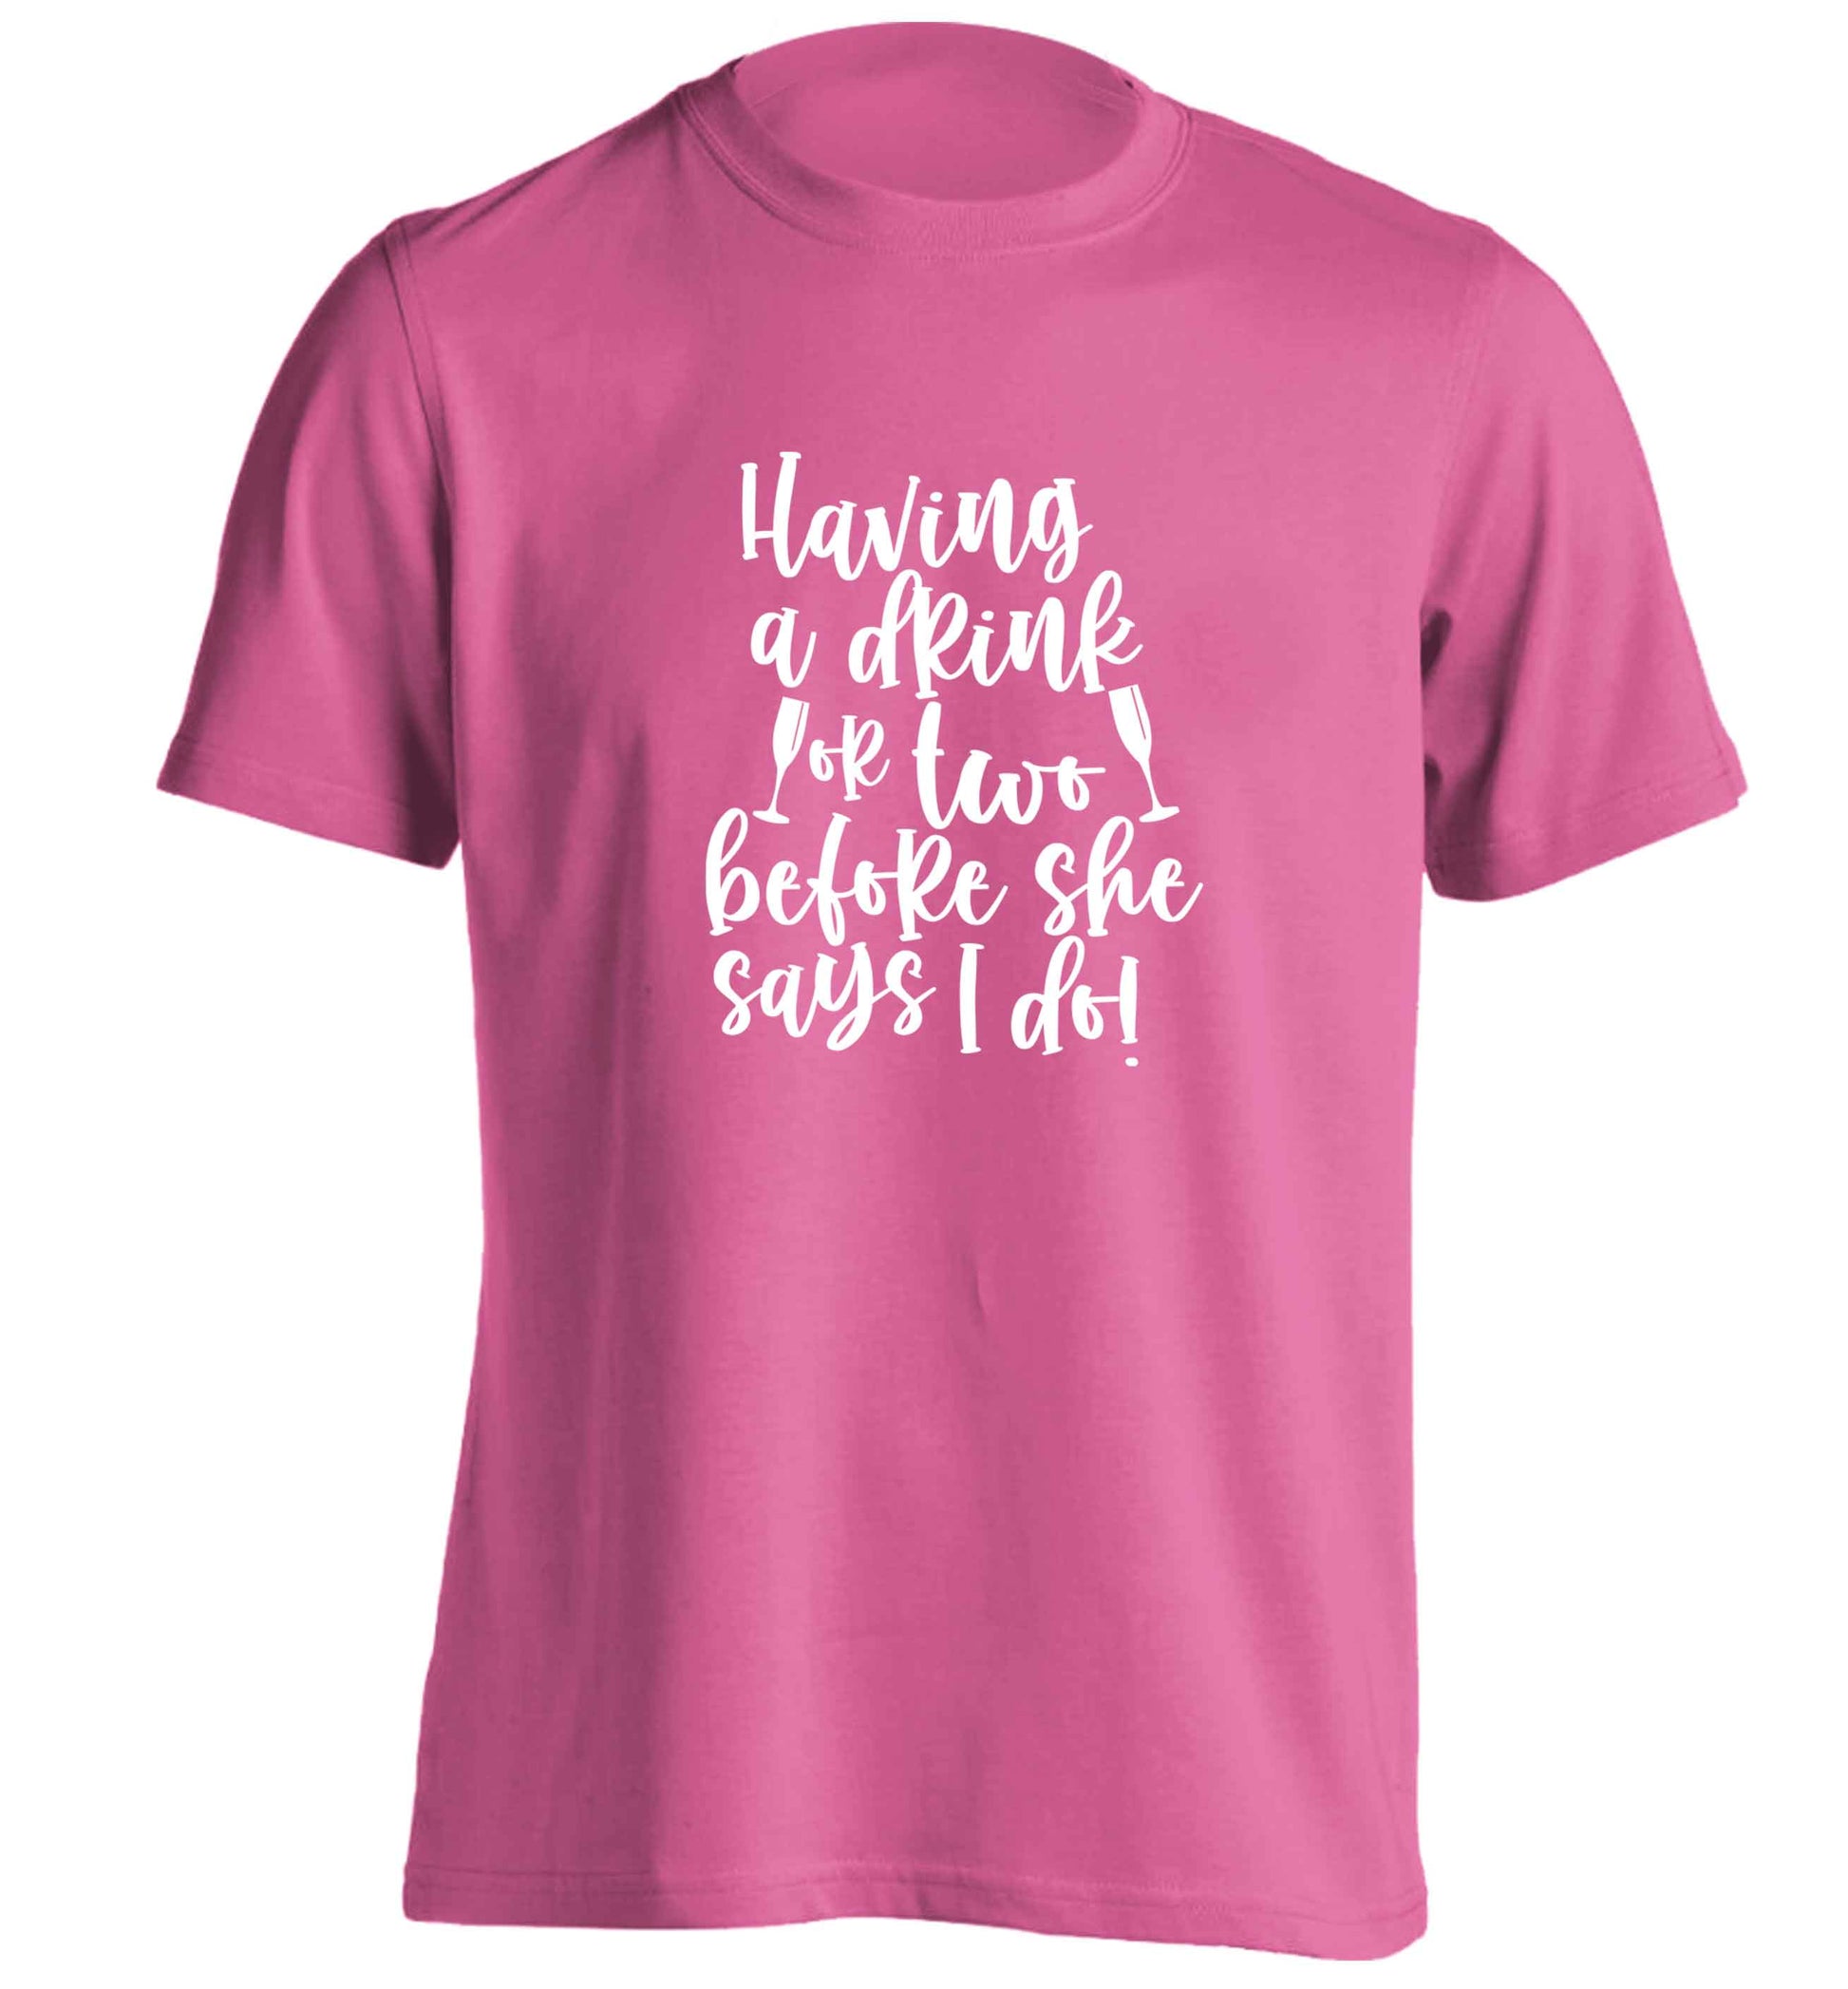 Having a drink or two before she says I do adults unisex pink Tshirt 2XL